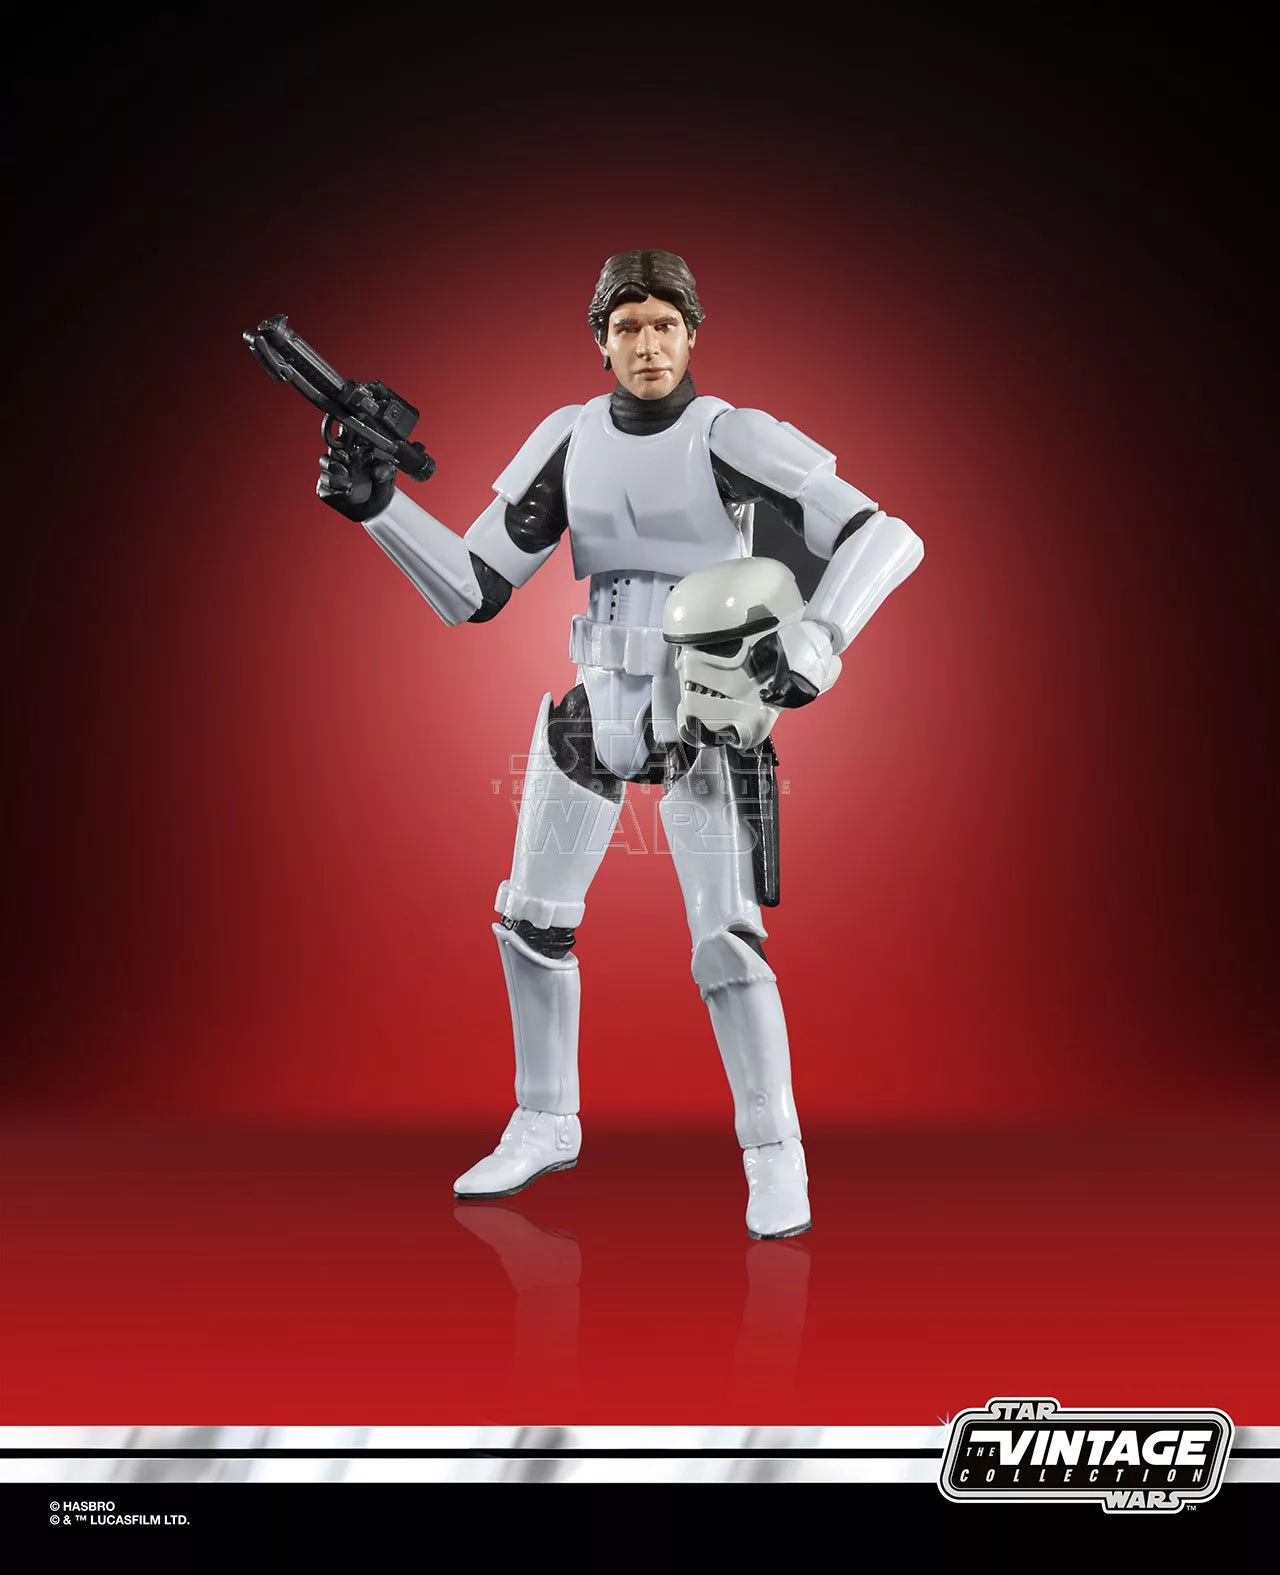 Star Wars The Vintage Collection Han Solo (Trooper Disguise) Figure 2 Target Exclusive